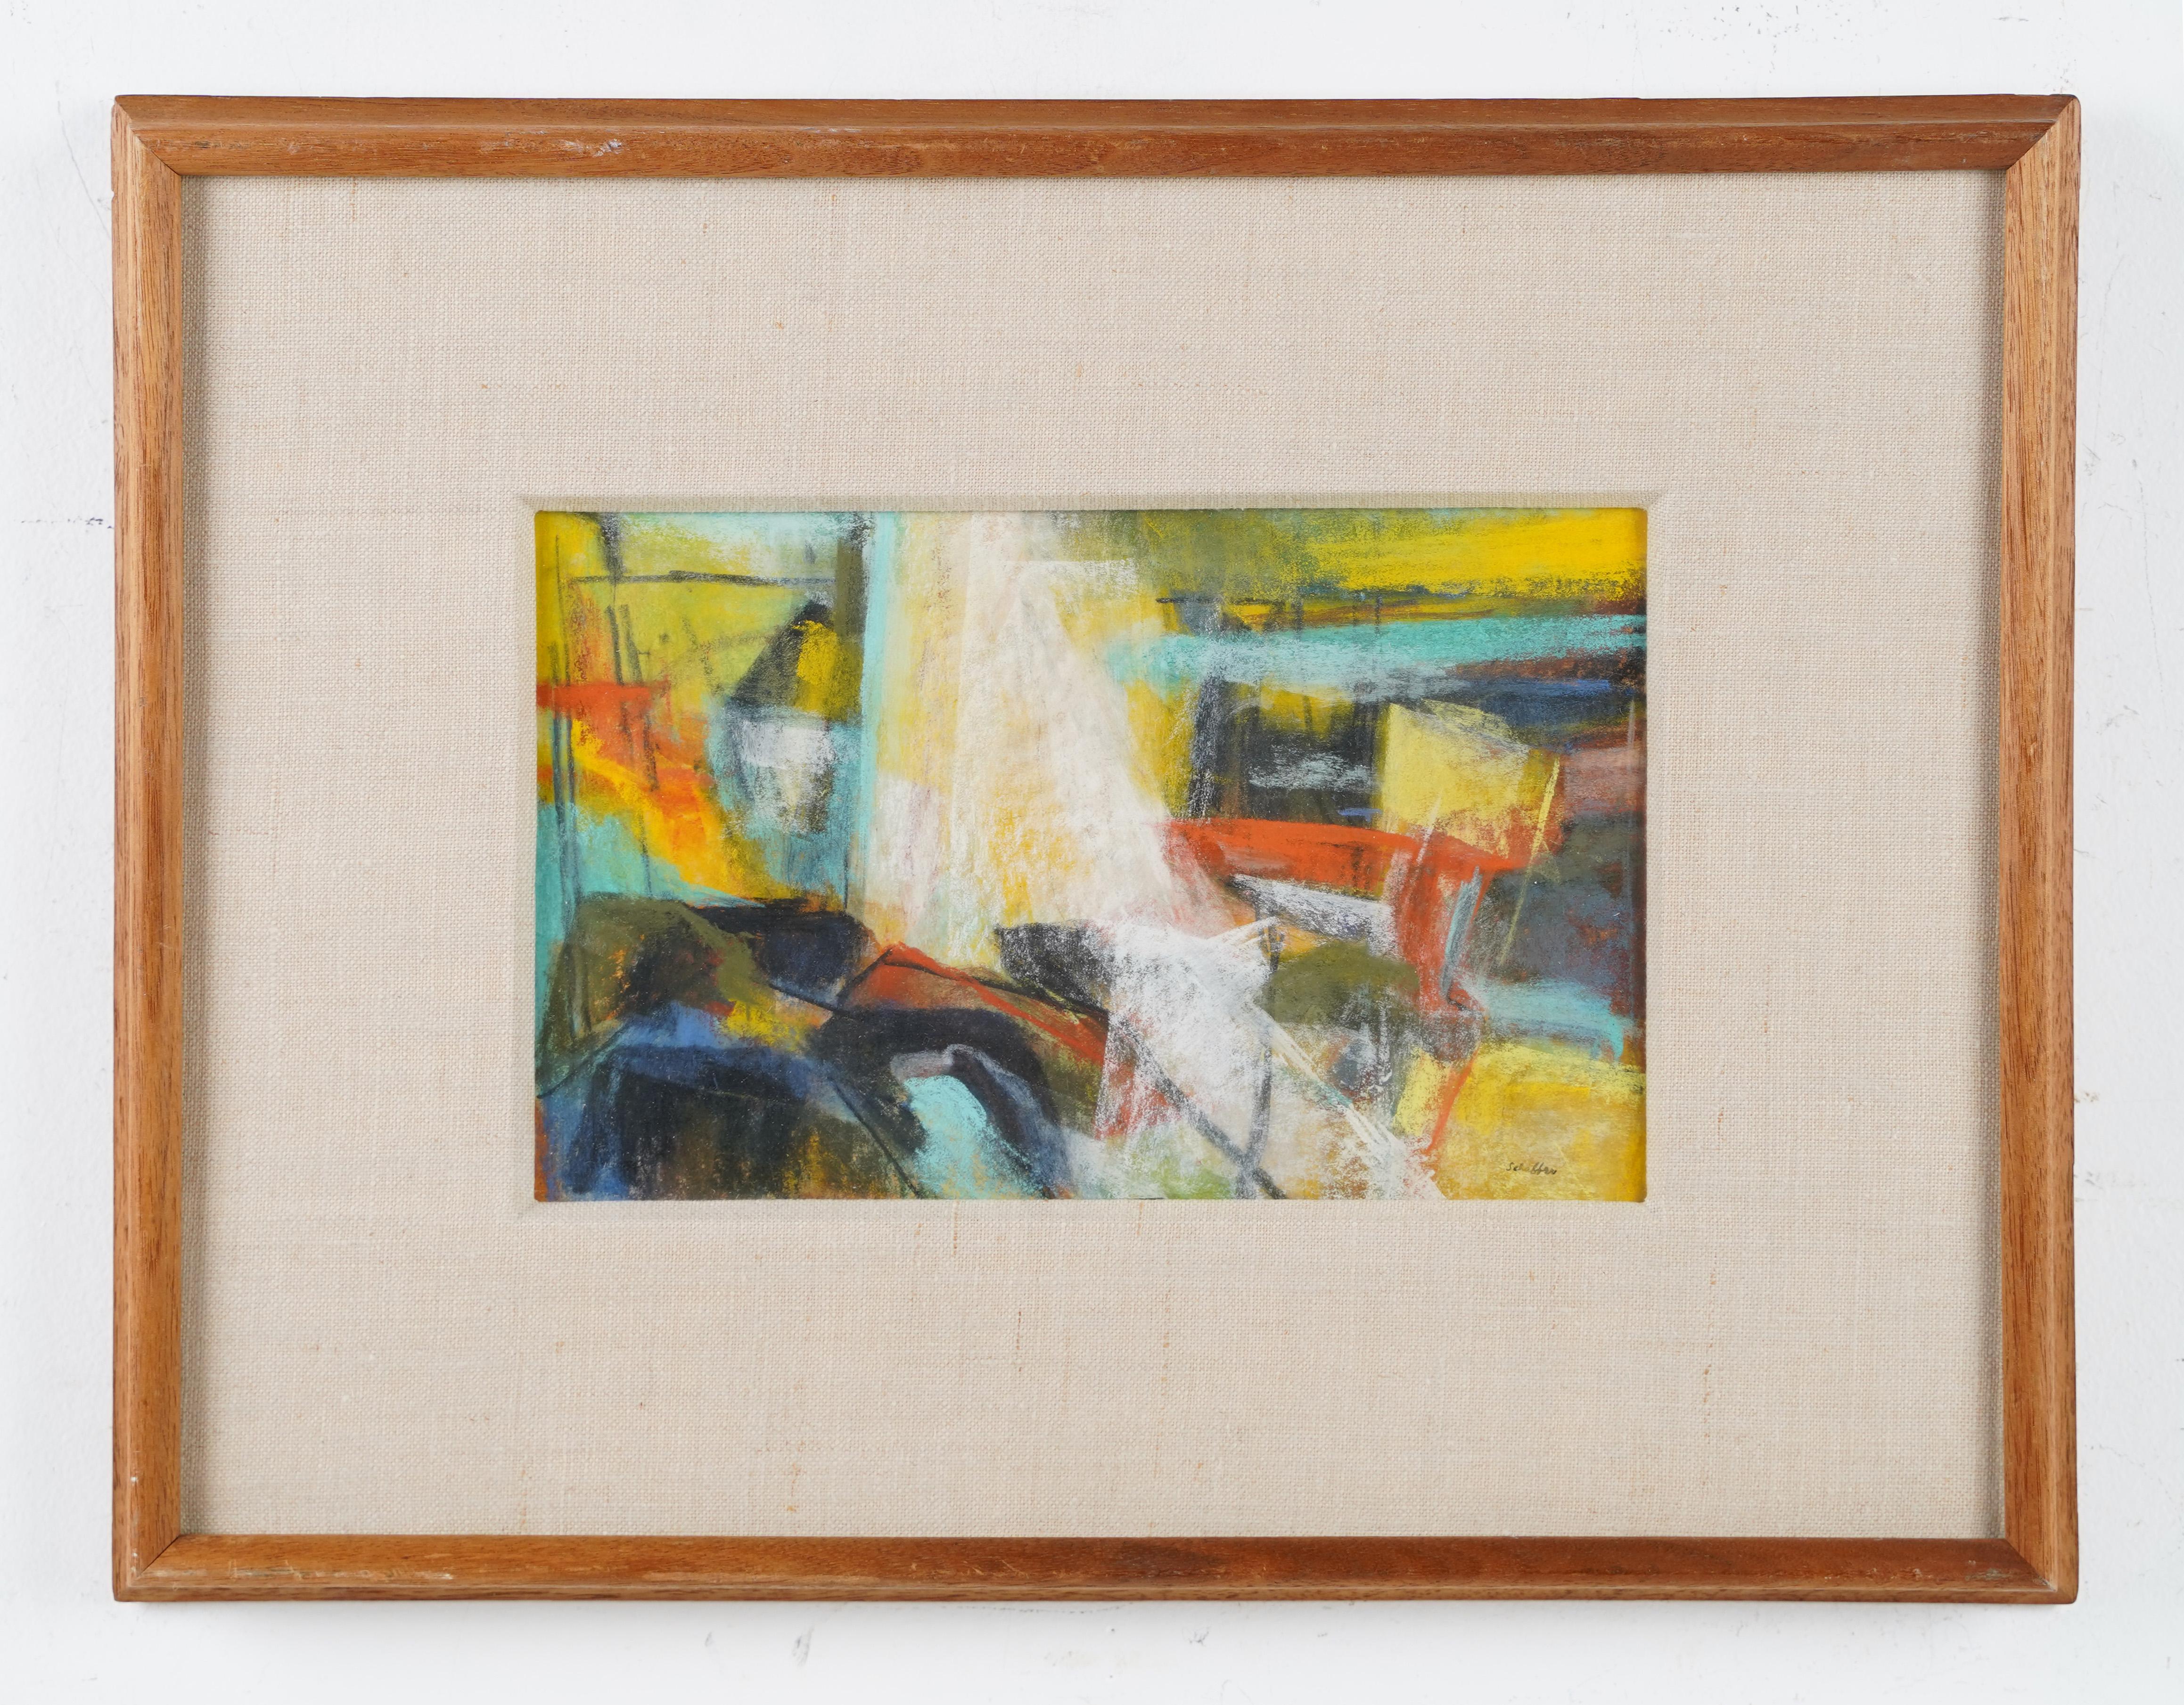 Antique American modernist abstract painting.  Watercolor, and pastel on paper.  Framed.  Signed.  Image size, 6.5H by 10L
